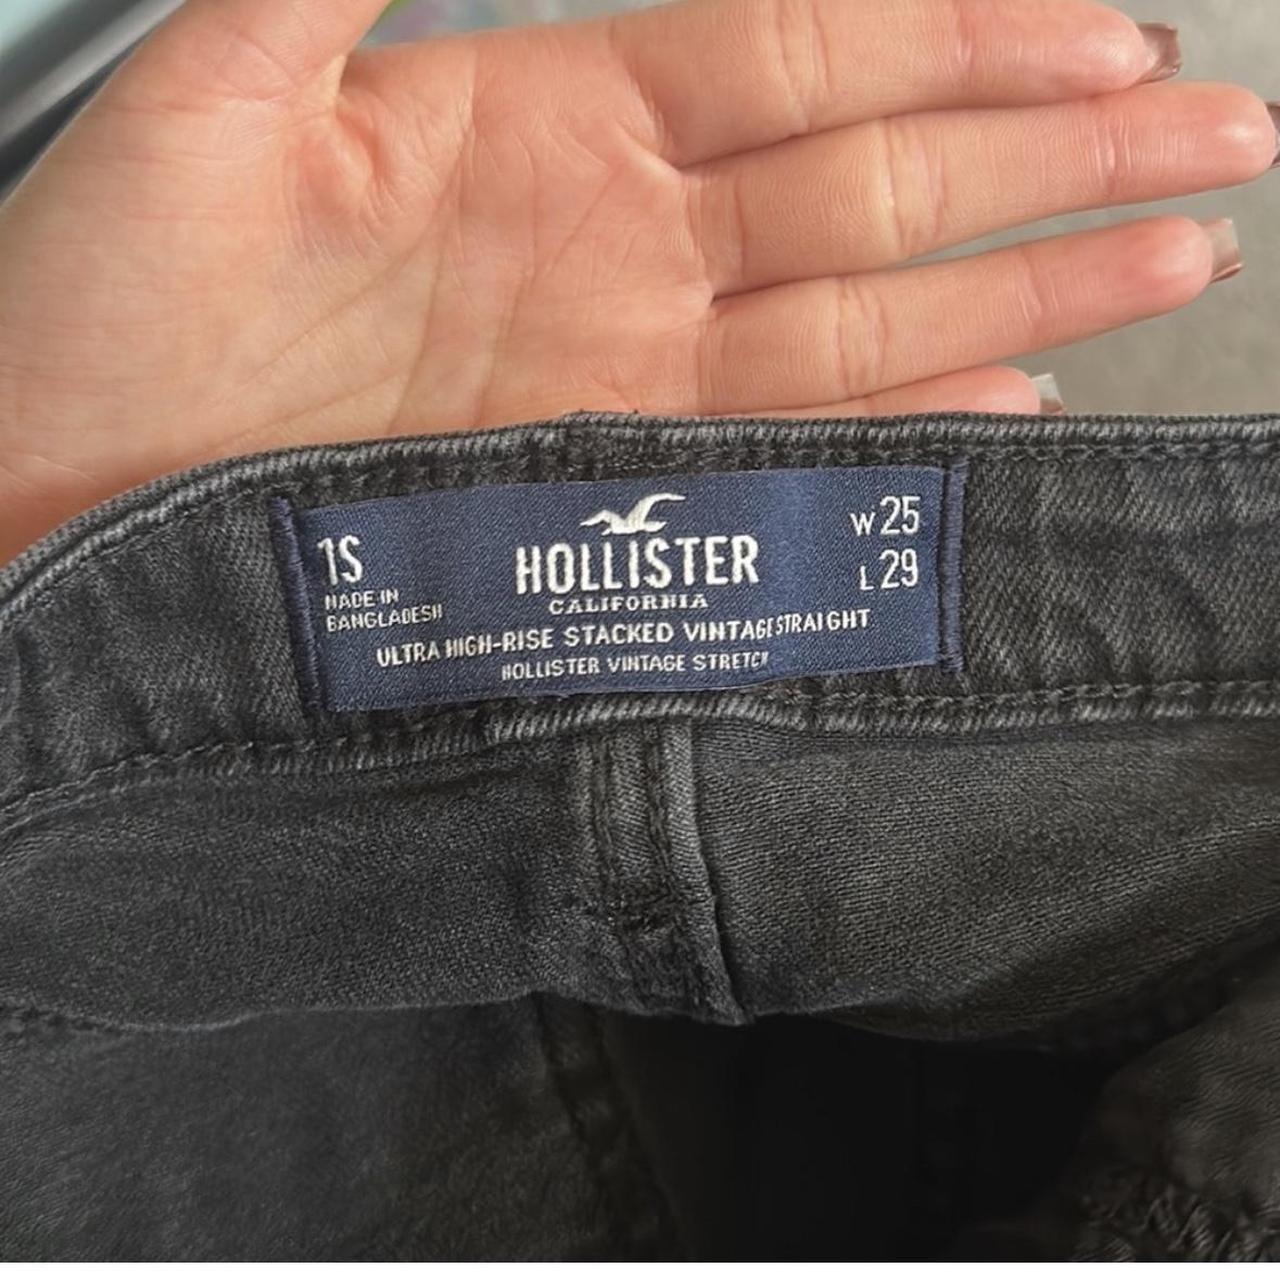 Hollister Ultra High Rise Stacked Vintage Straight Jeans